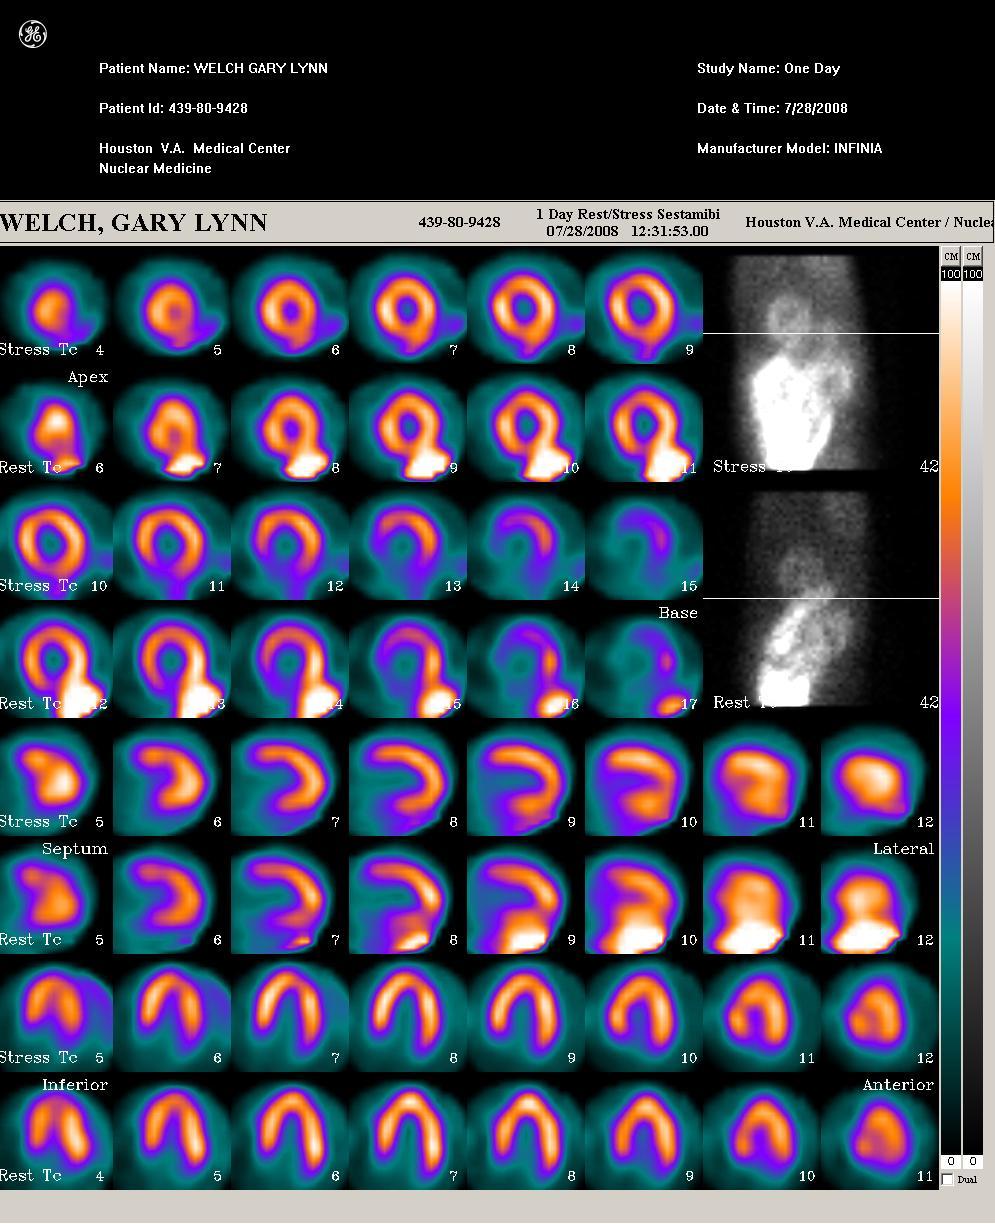 inferior (hurricane sign) vs septal / lateral, cardiac creep exercise and thallium Recognition: review raw data in cine mode Solution: reimaging, preparation and positioning, motion correction